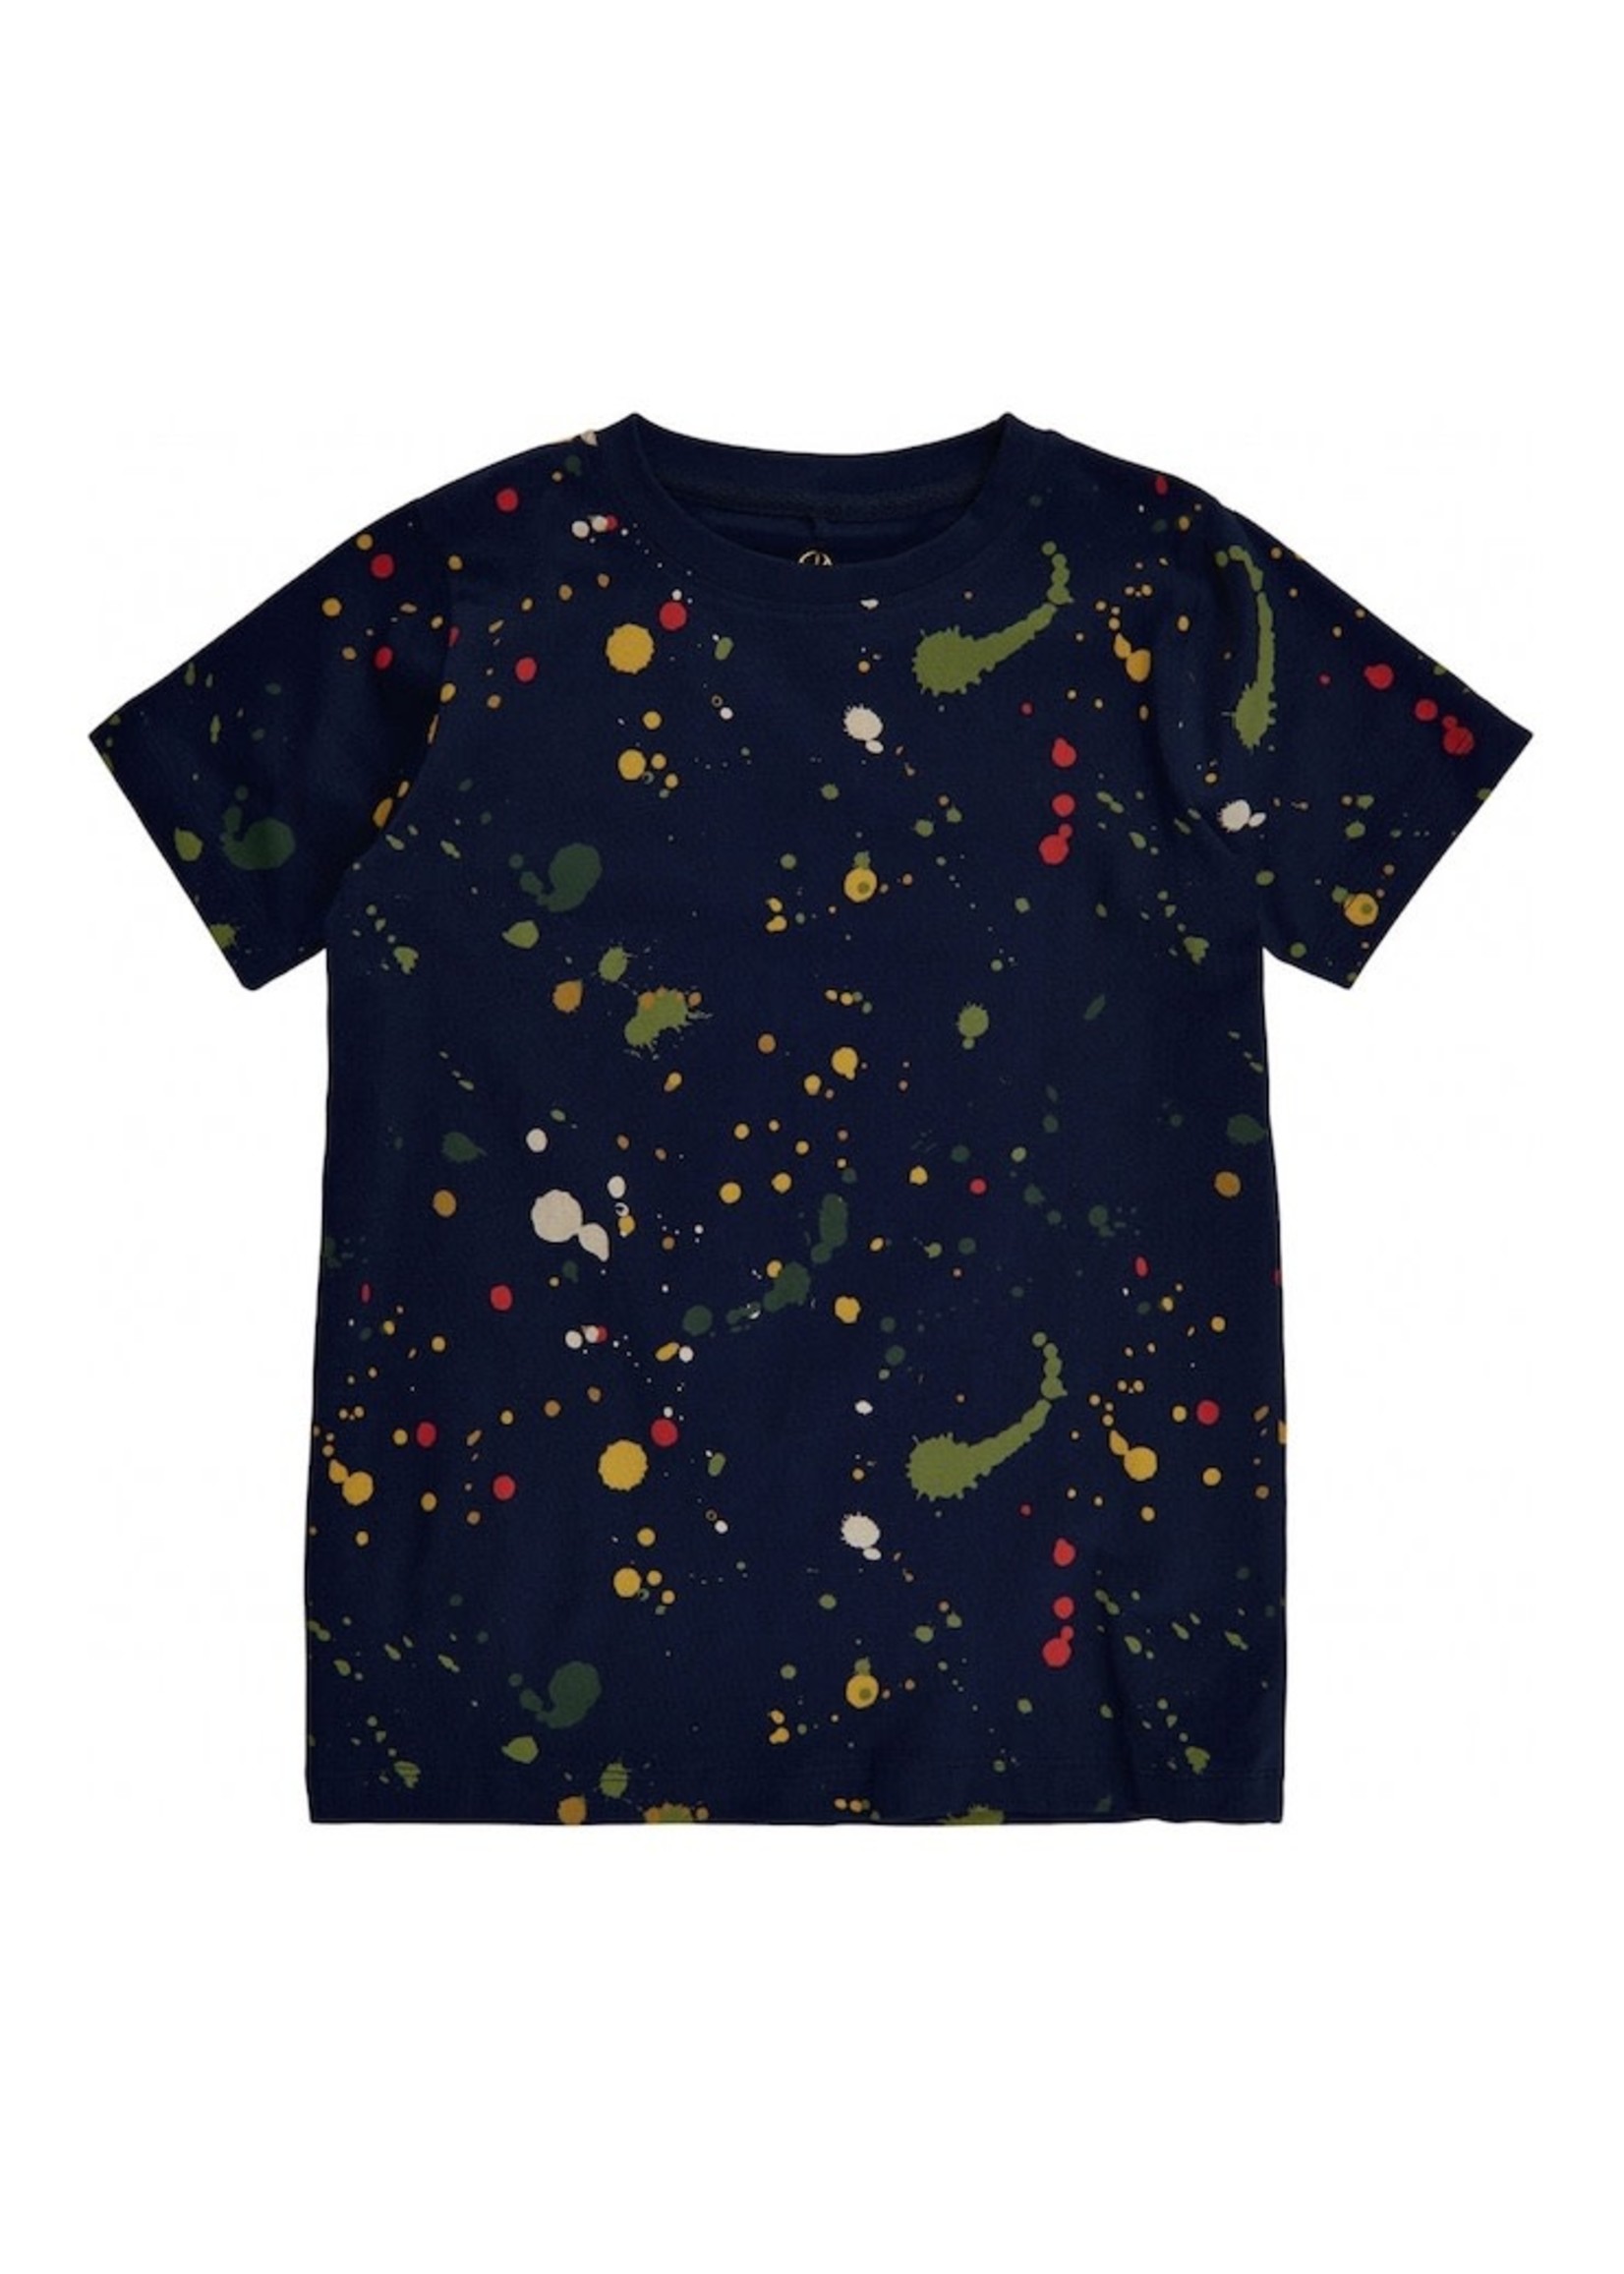 The New The New, Bongo Paint Splatter Graphic Tee in Navy